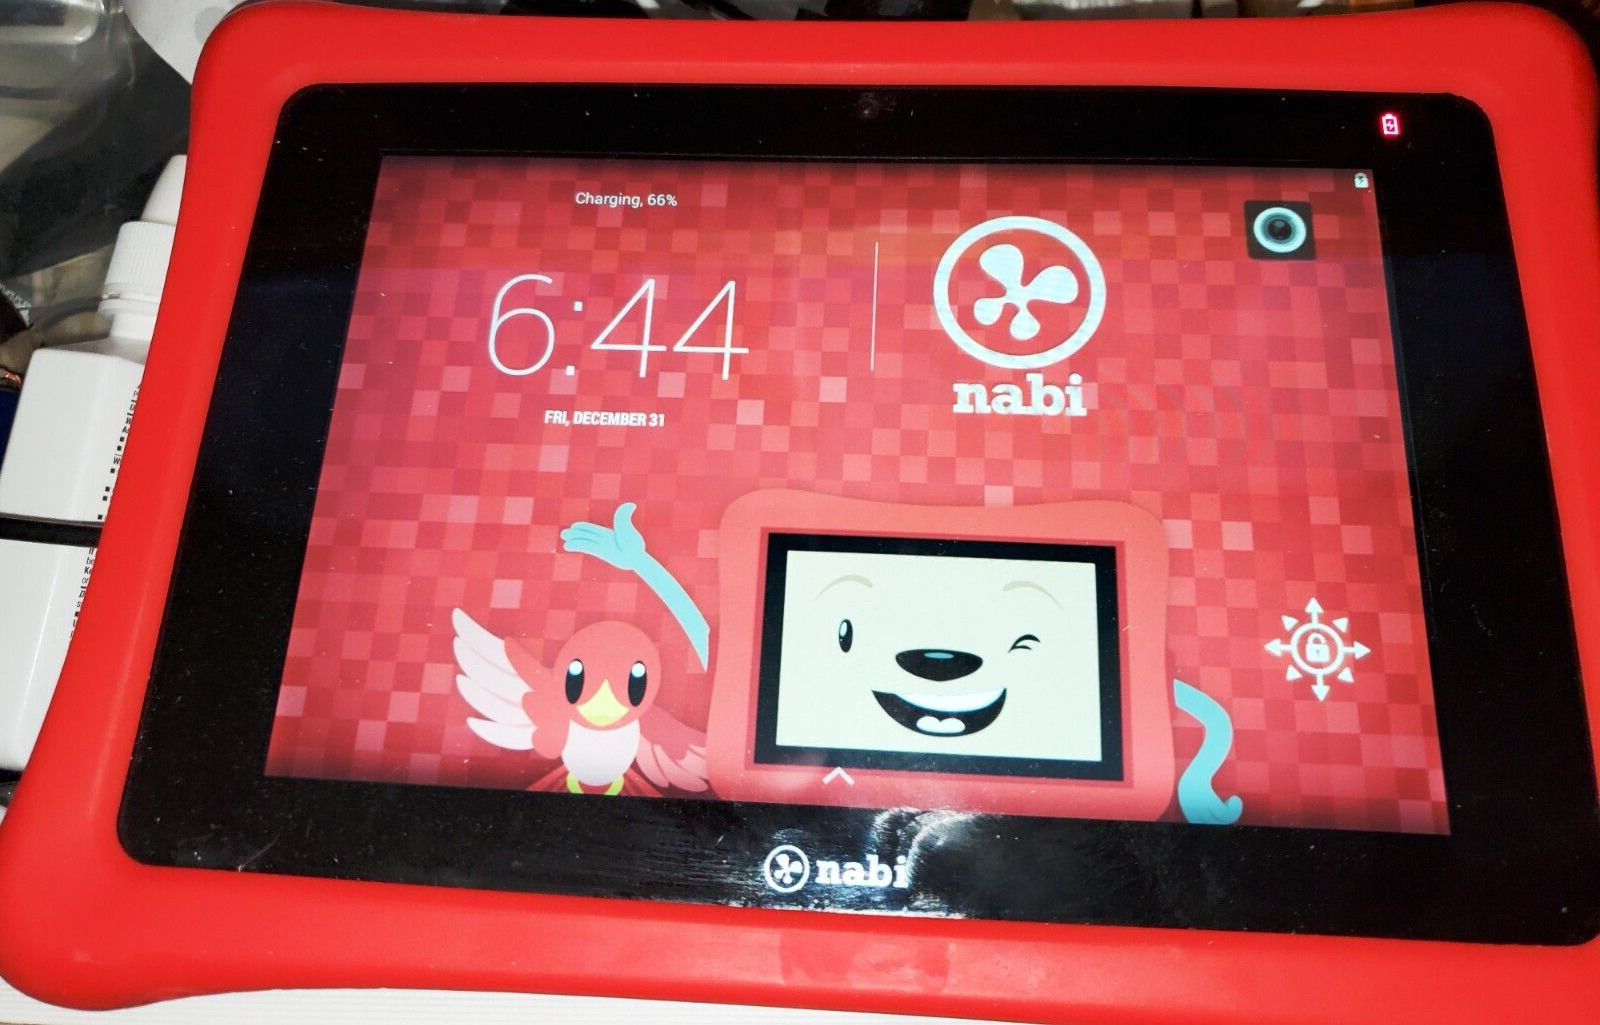 Nabi NABI2 NV7A  7-Inch Multi-Touch Tablet Android seems to work OK. no charger